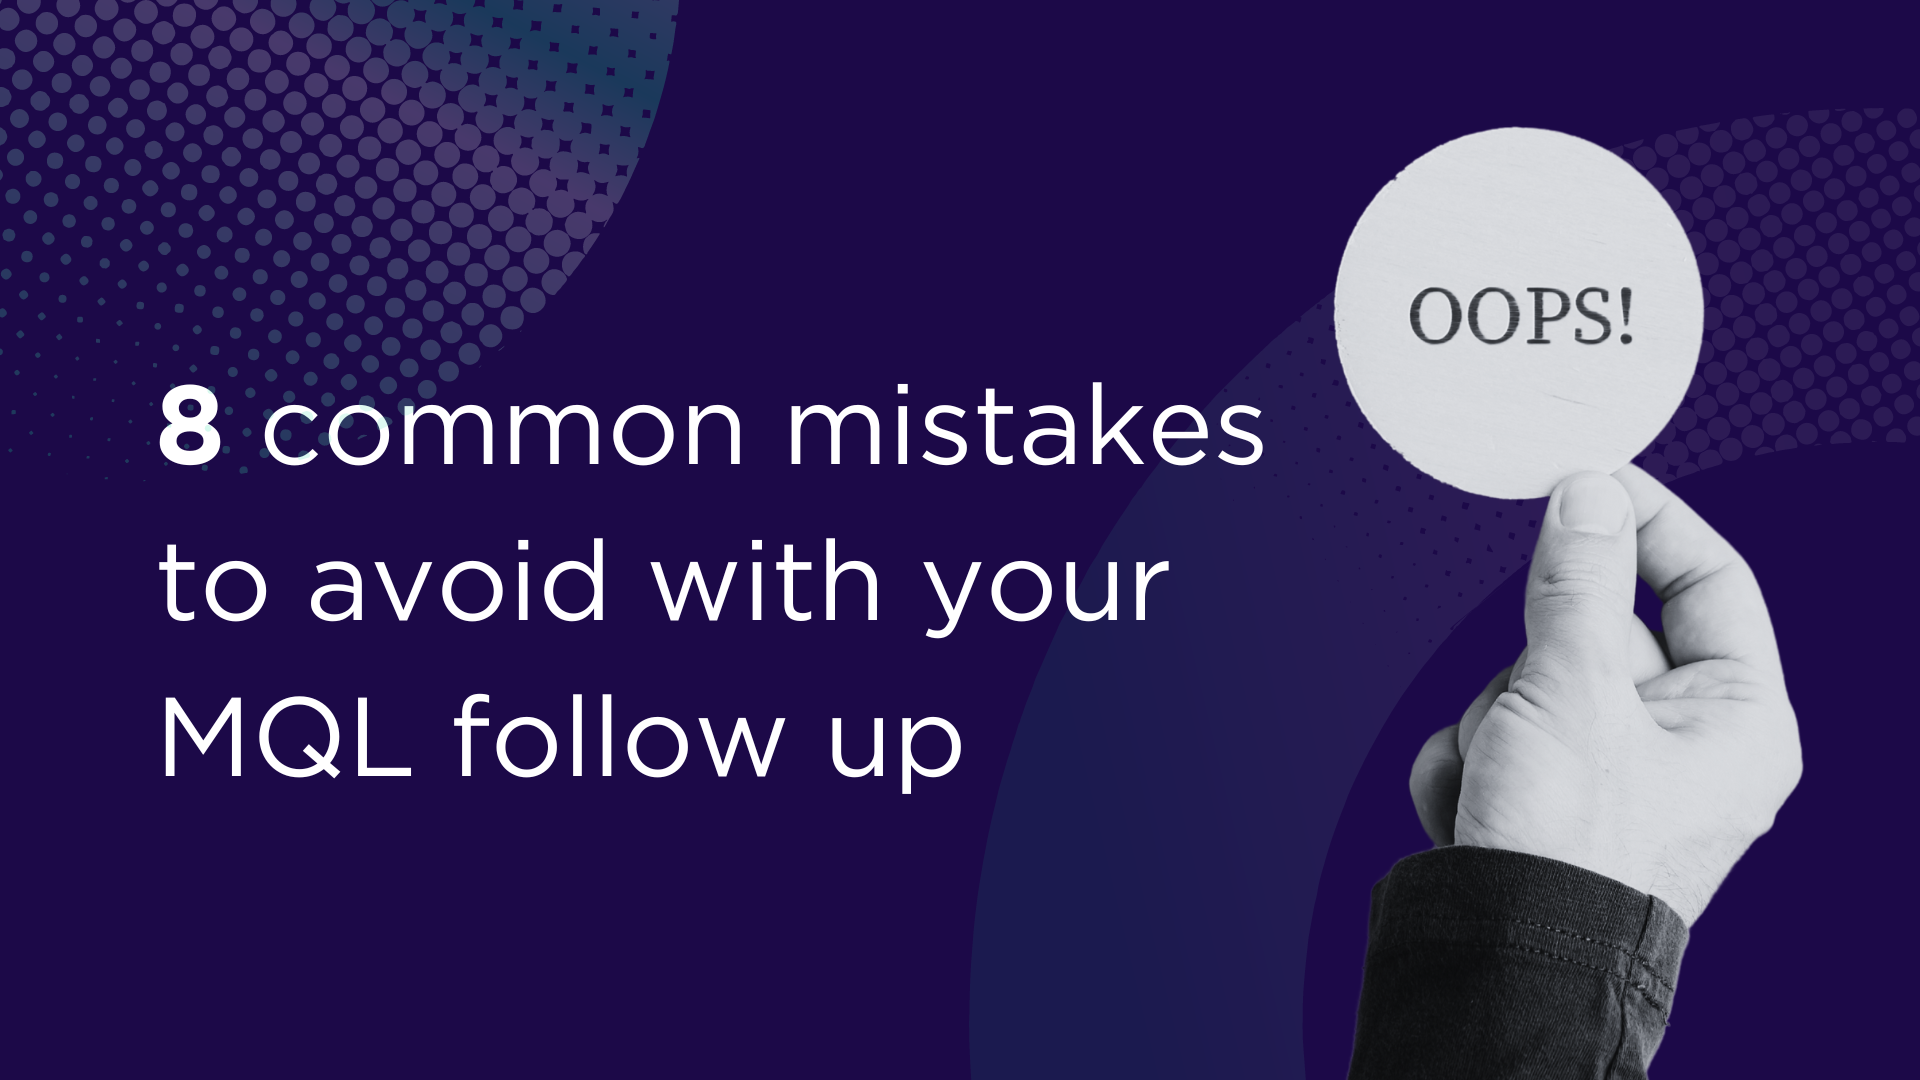 8 common mistakes to avoid with your MQL follow up